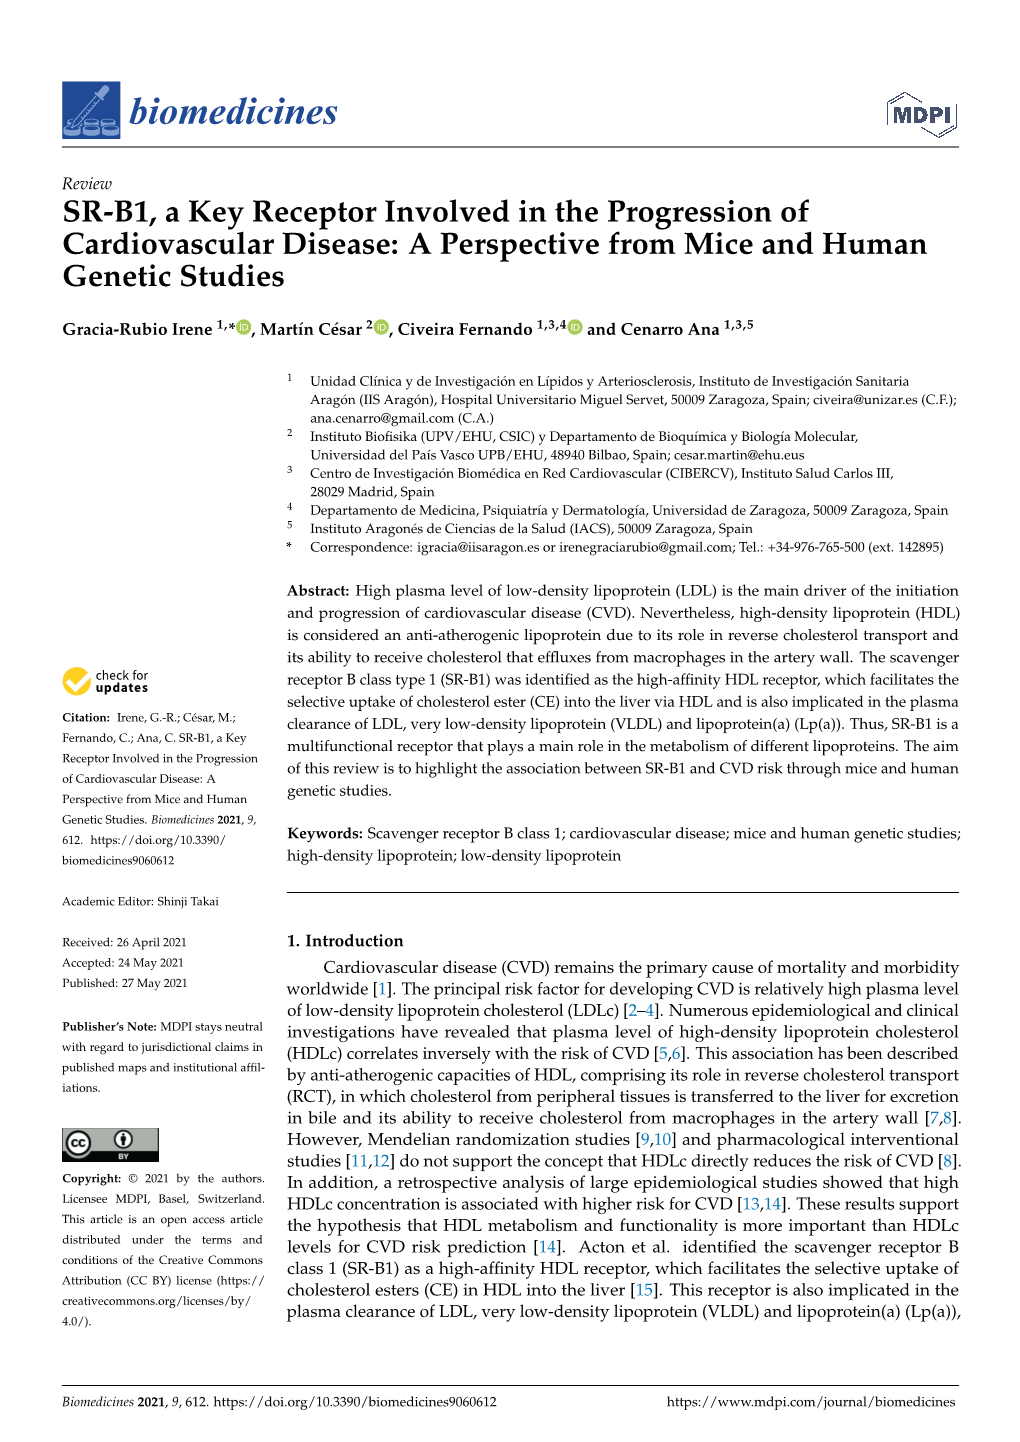 SR-B1, a Key Receptor Involved in the Progression of Cardiovascular Disease: a Perspective from Mice and Human Genetic Studies